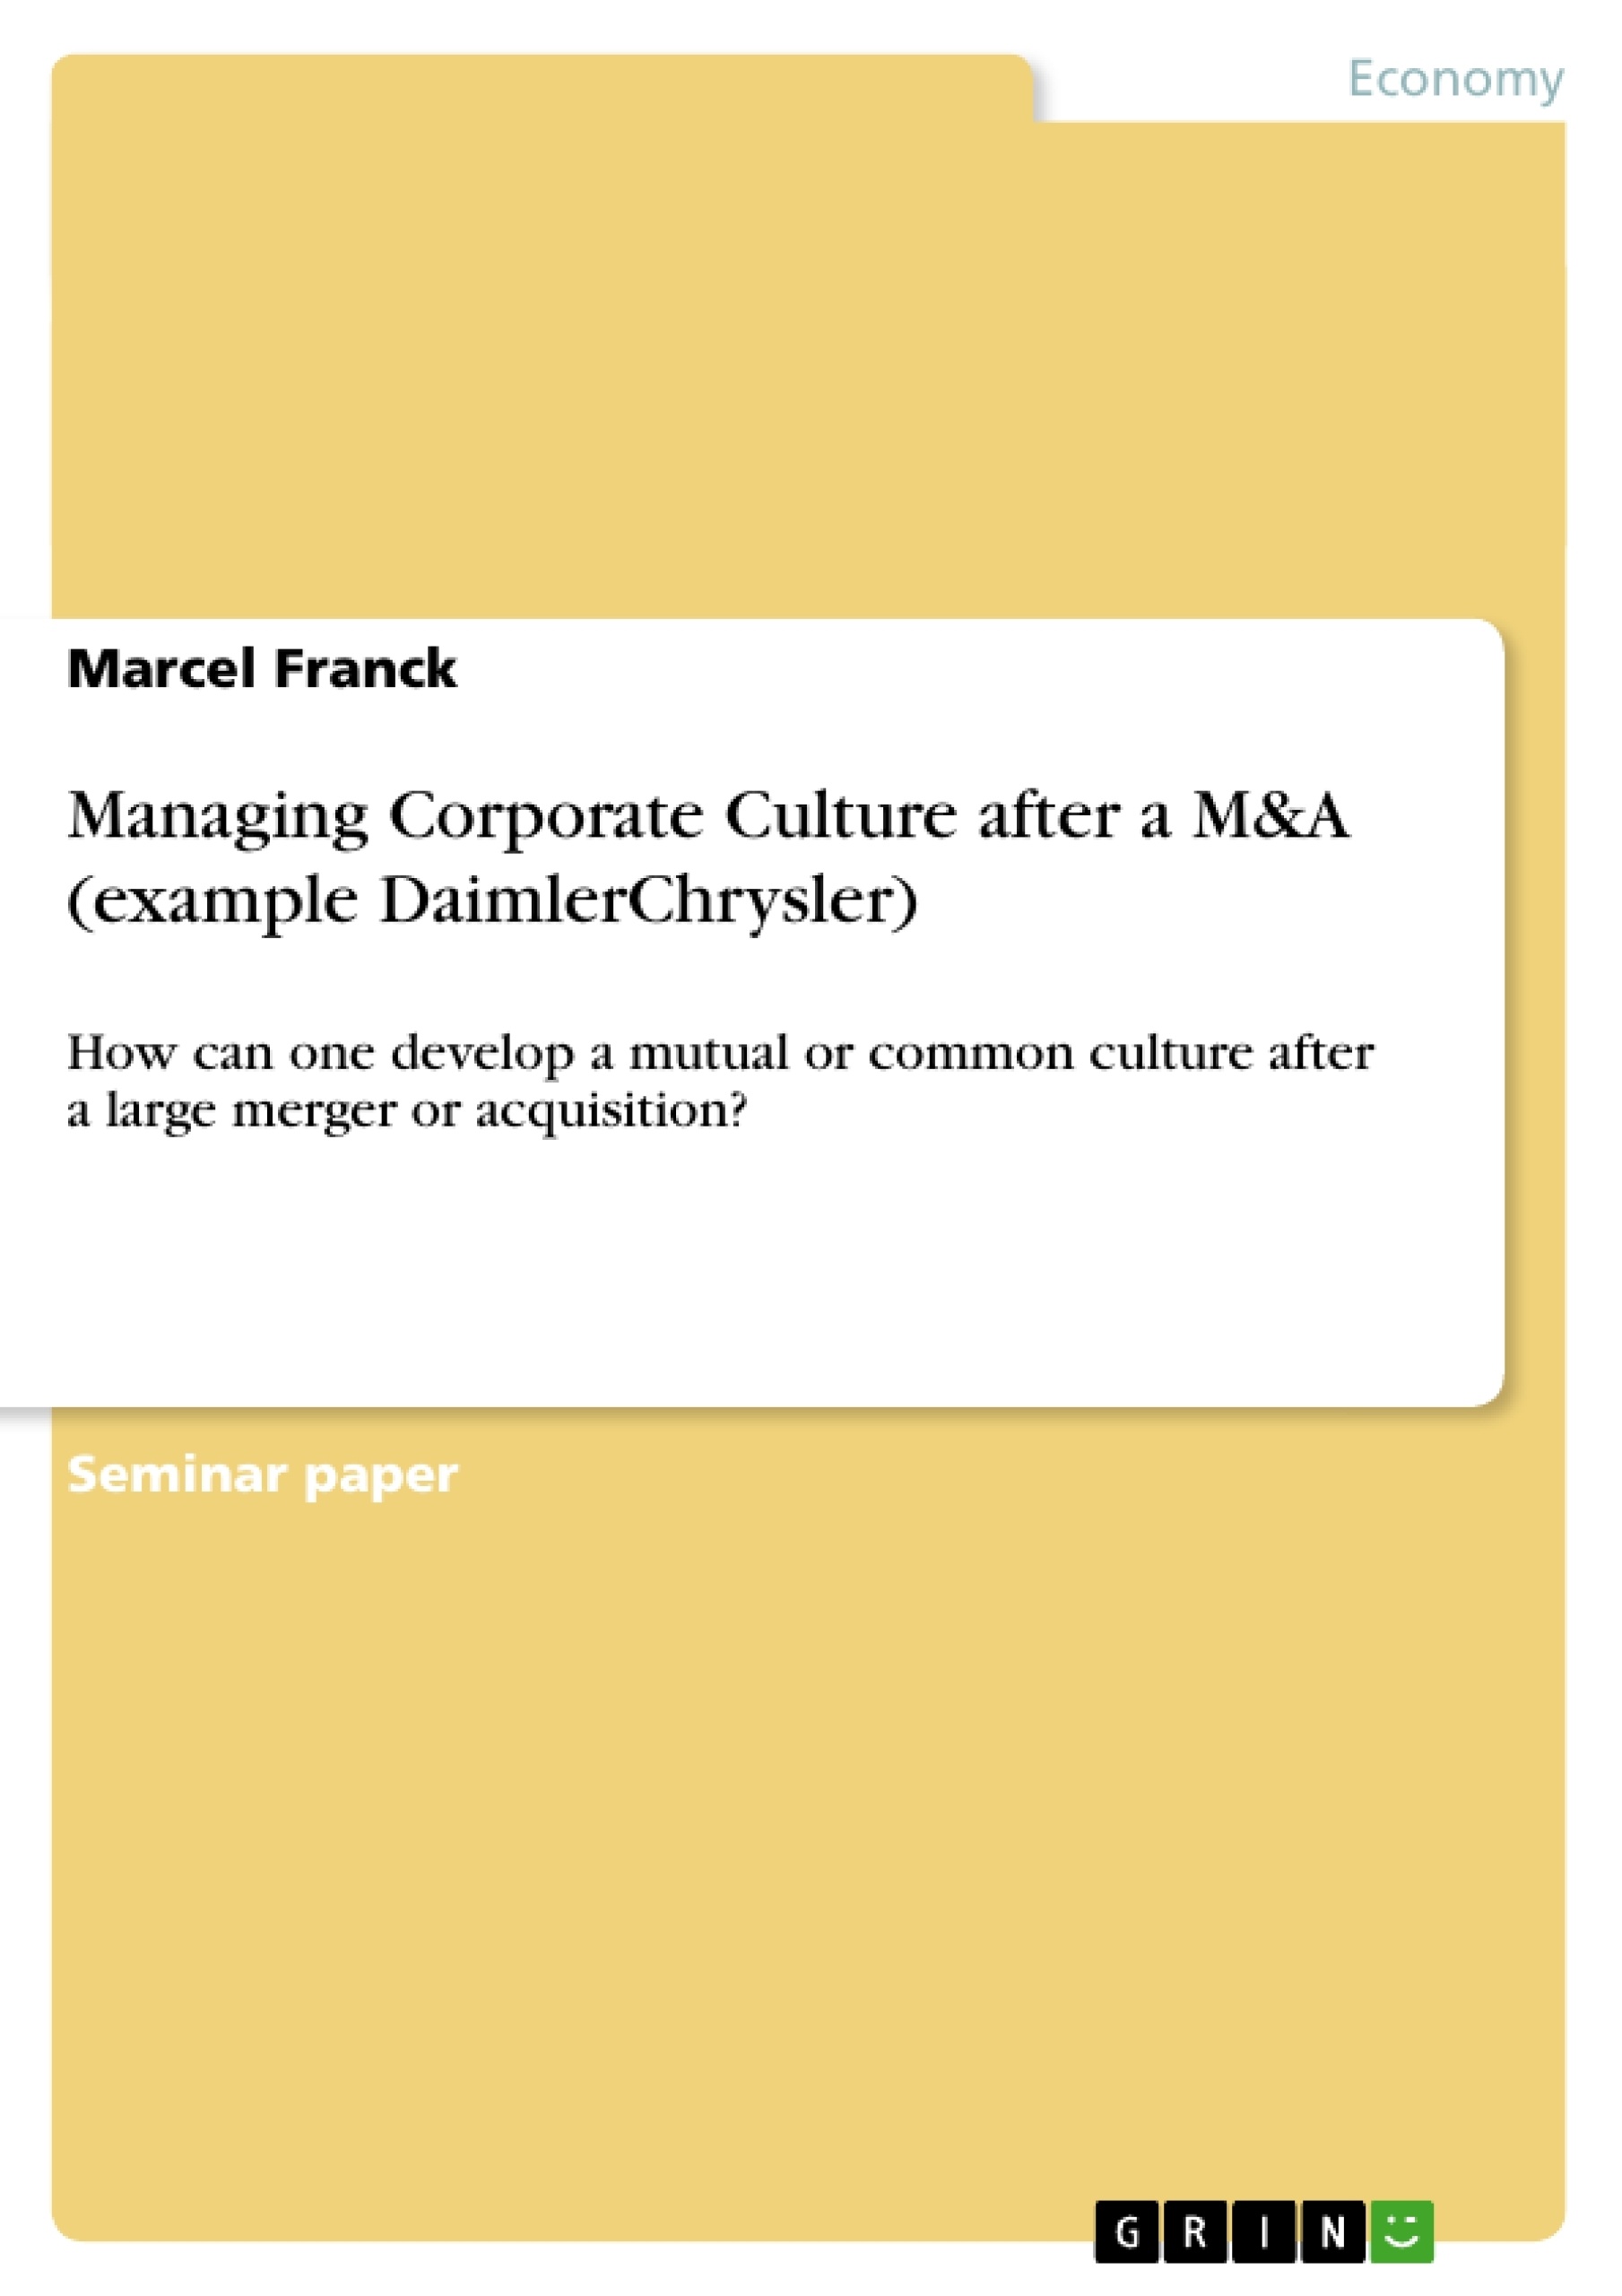 Title: Managing Corporate Culture after a M&A (example DaimlerChrysler)